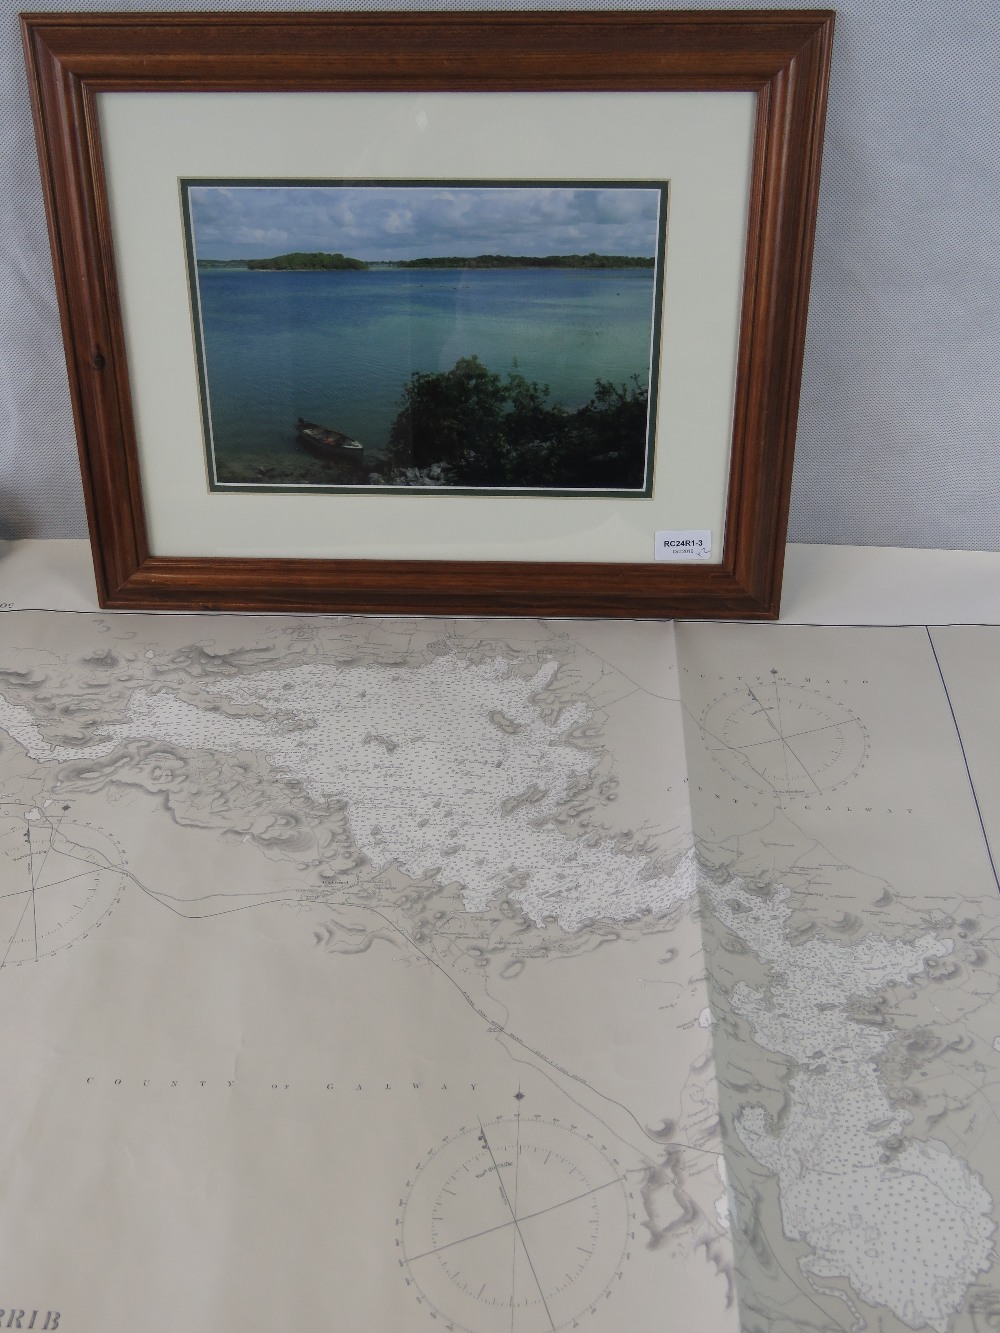 A 1995 map of Loughs Corrib & Mask together with a framed photograph of Lough Carra. Two items.